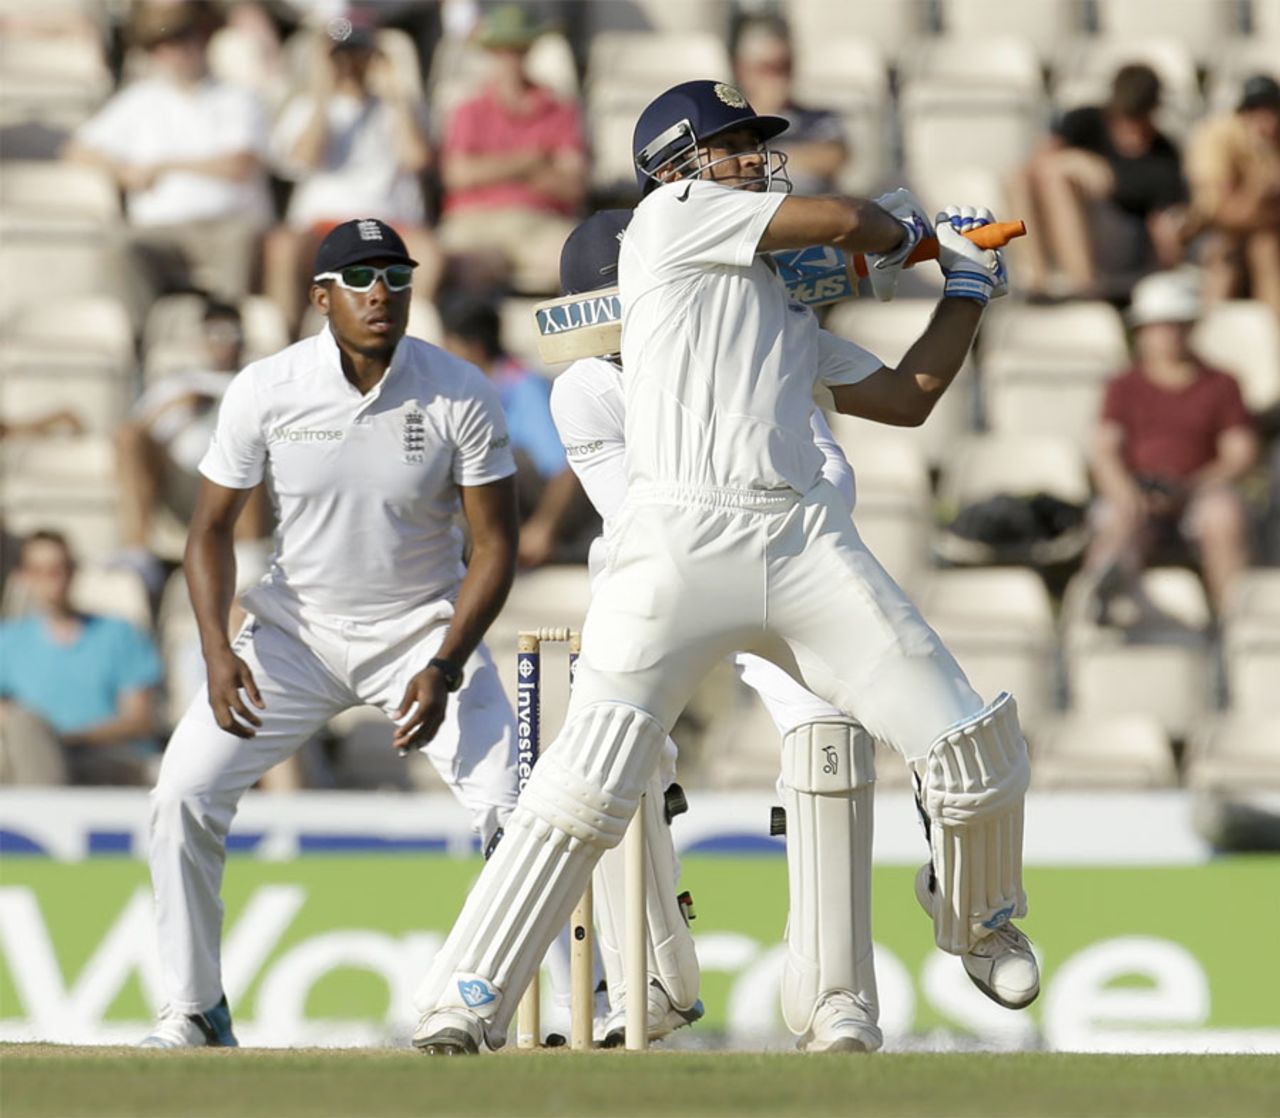 MS Dhoni recorded his 10th fifty against England, England v India, 3rd Investec Test, Ageas Bowl, 3rd day, July 29, 2014